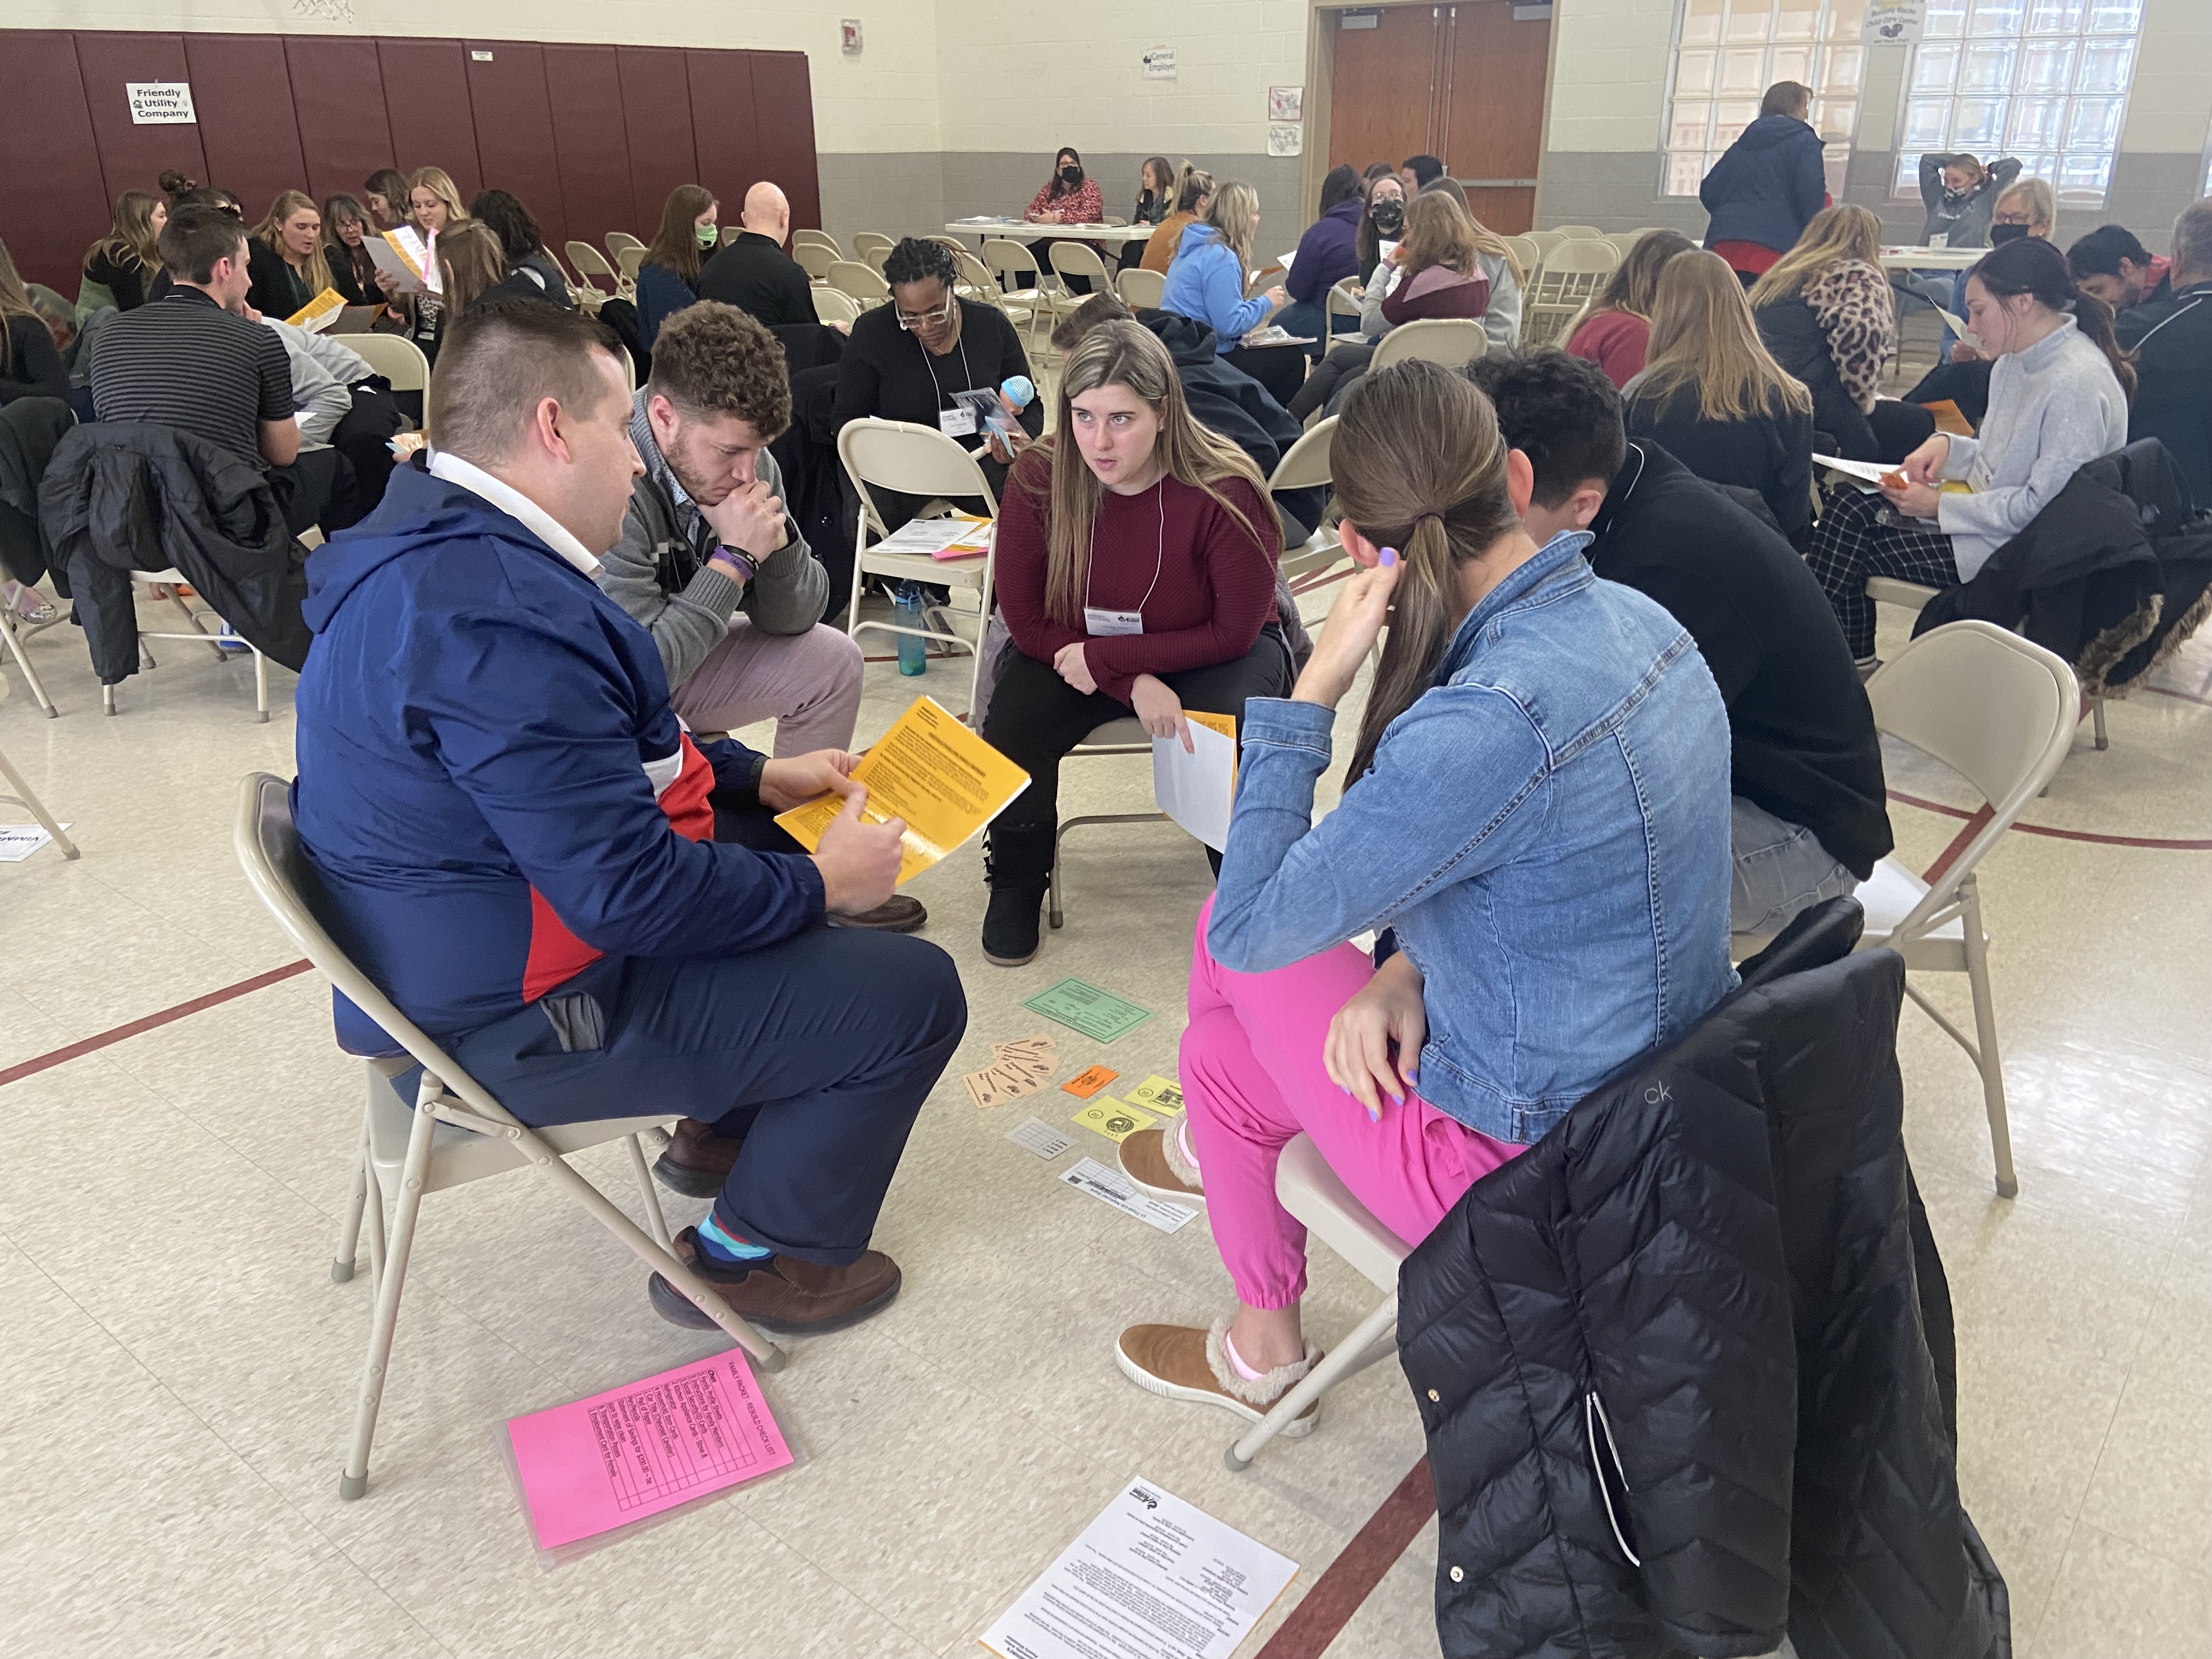 Mount Union Students Participate in Poverty Simulation Exercise